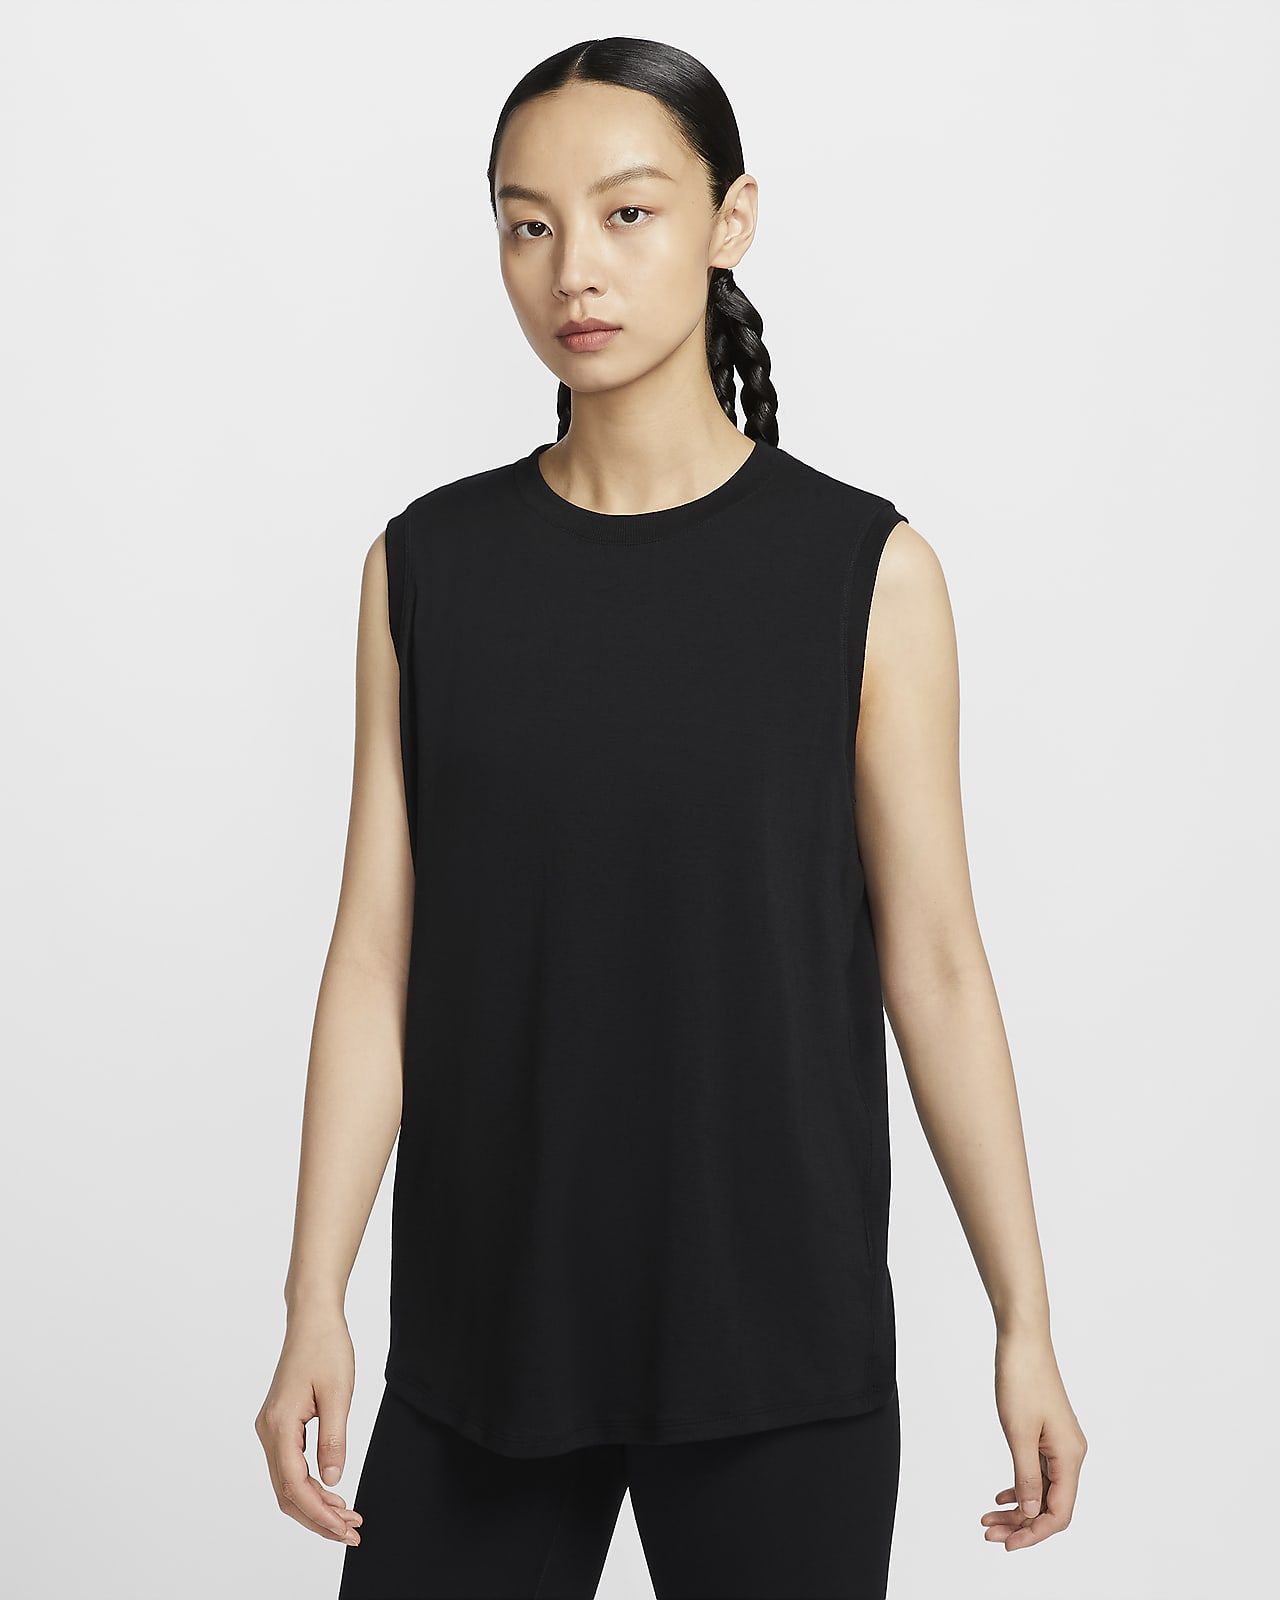 Nike One Relaxed 女款 Dri-FIT 背心上衣